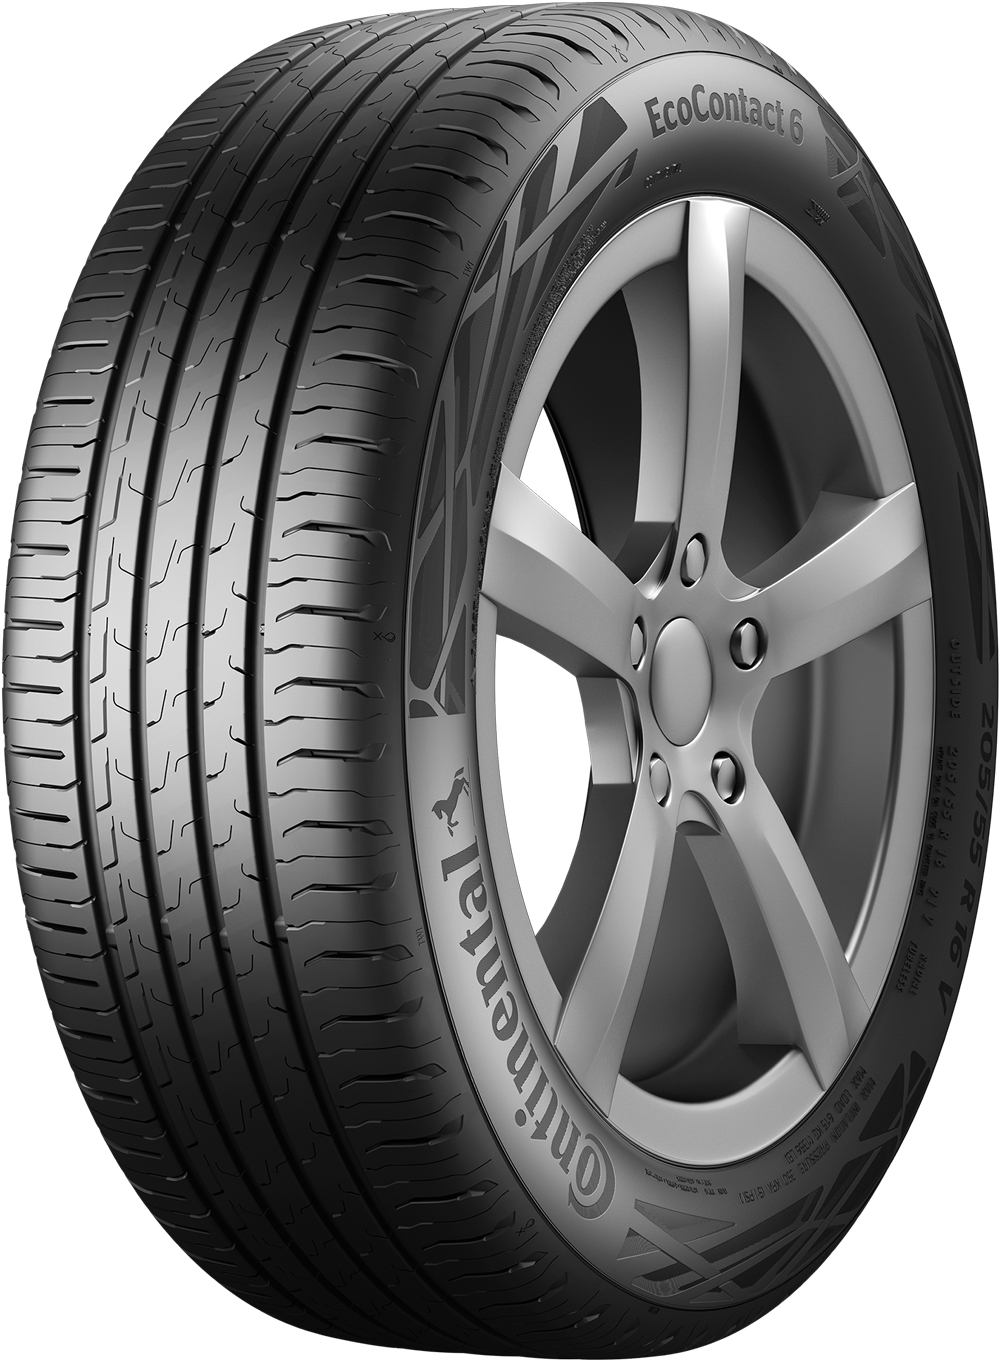 Anvelope auto CONTINENTAL ECO6XL XL 185/55 R16 87H